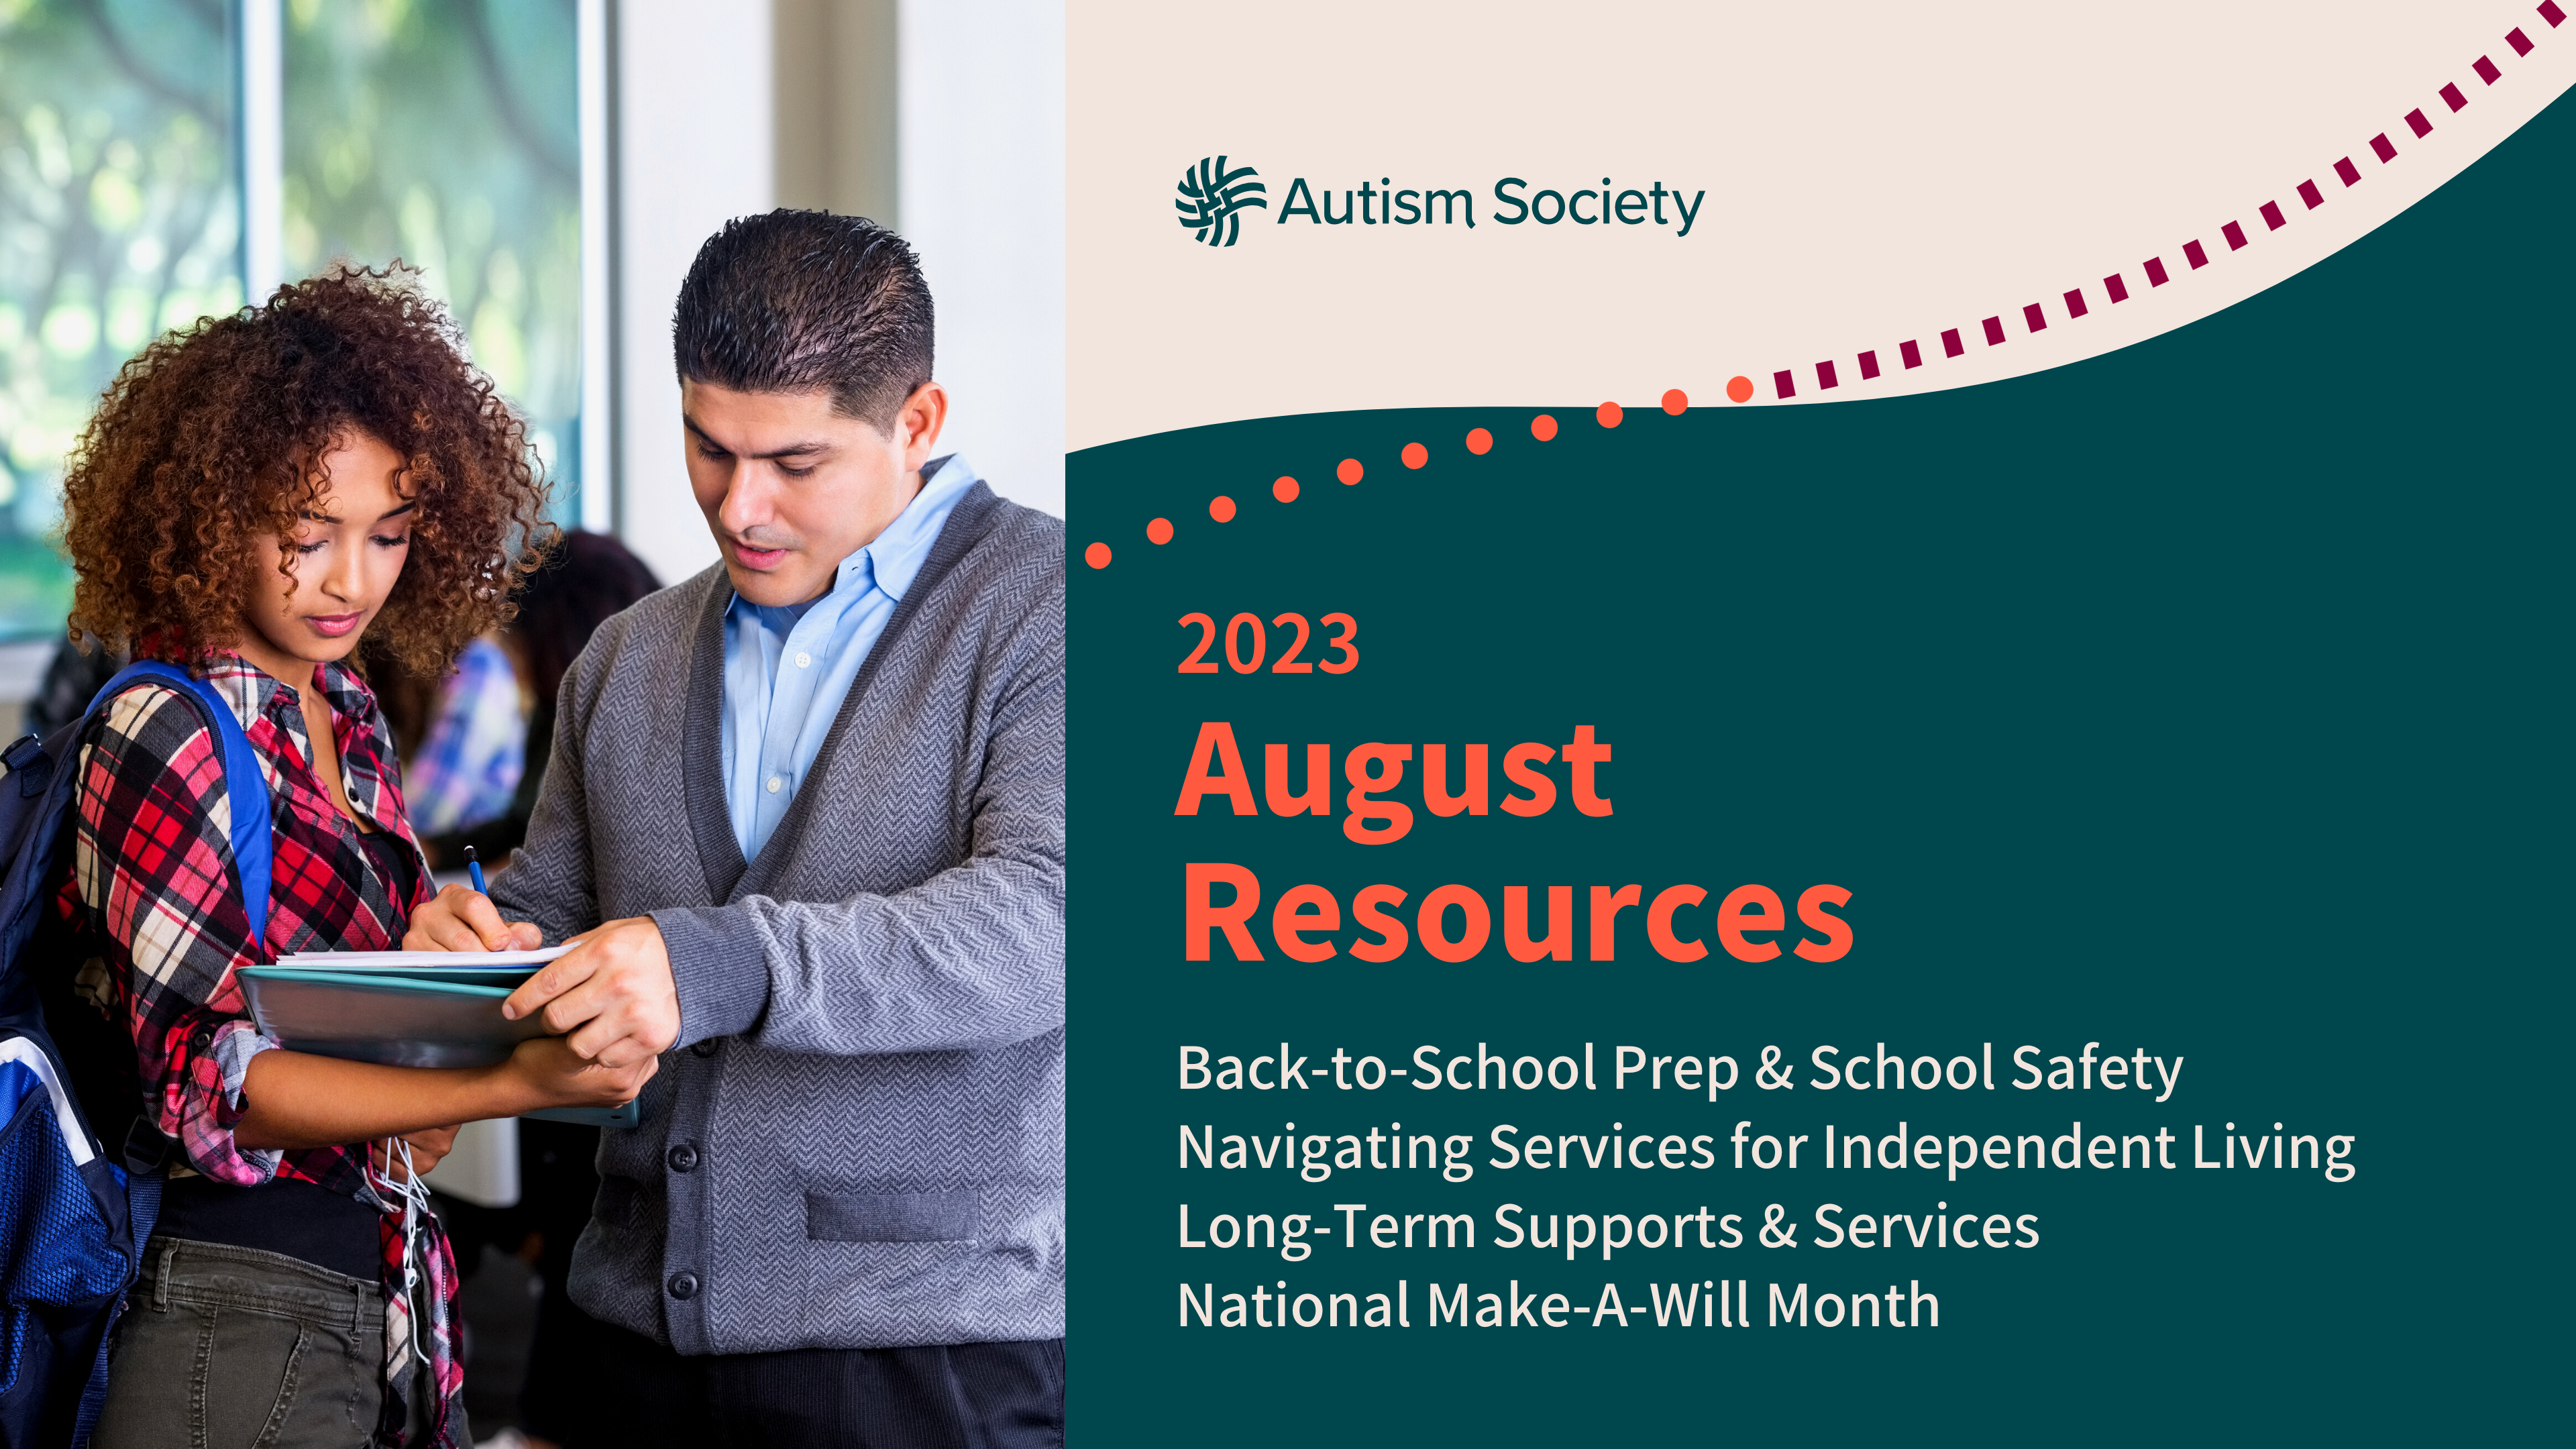 Autism Society 2023 August Resources Back to School Prep & School Navigating Services for Independent Long-Term Supports & Services. National Make A Will Month